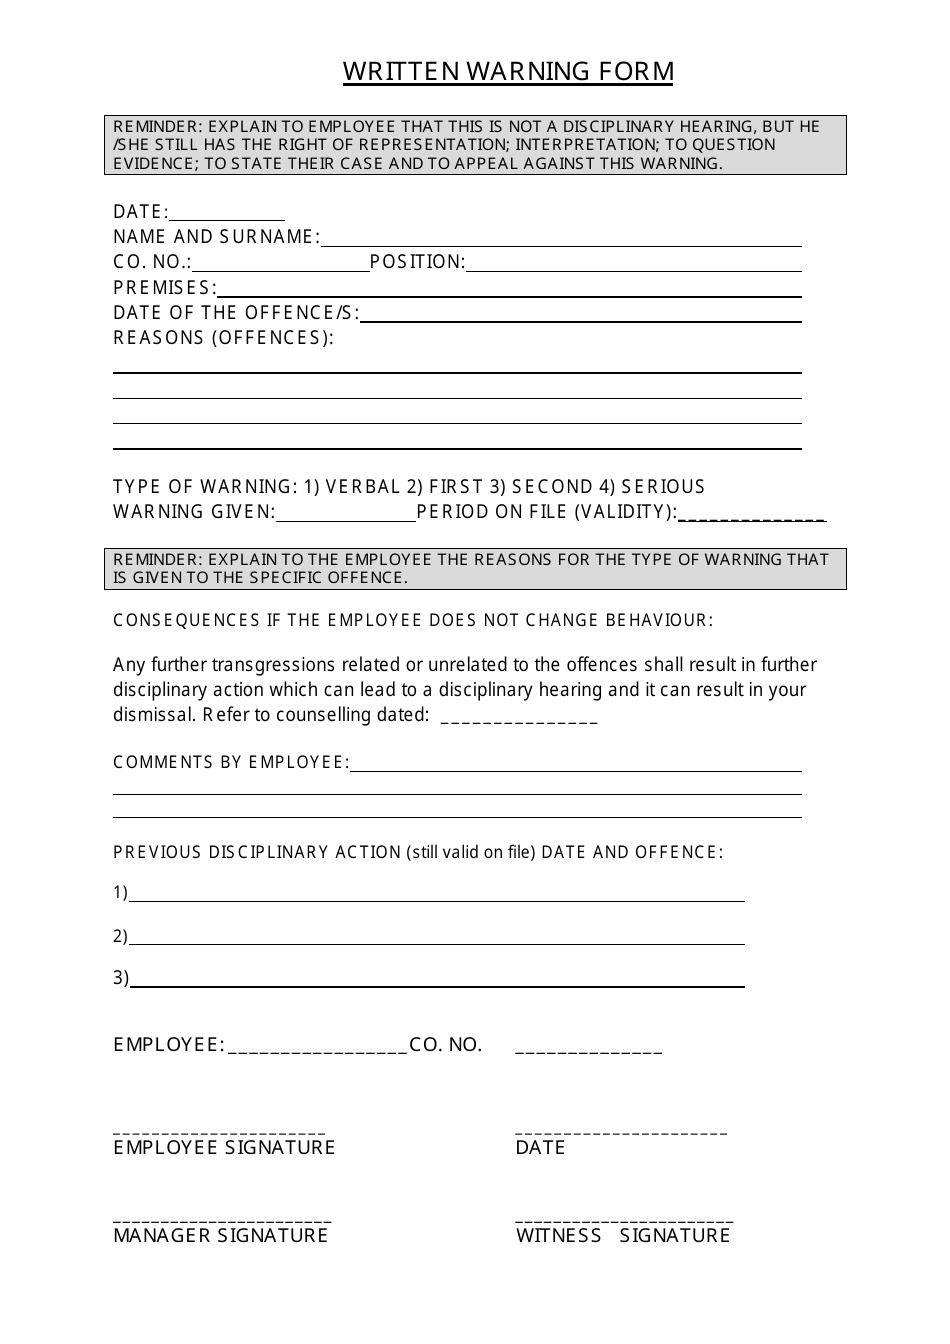 Written Warning Form, Page 1